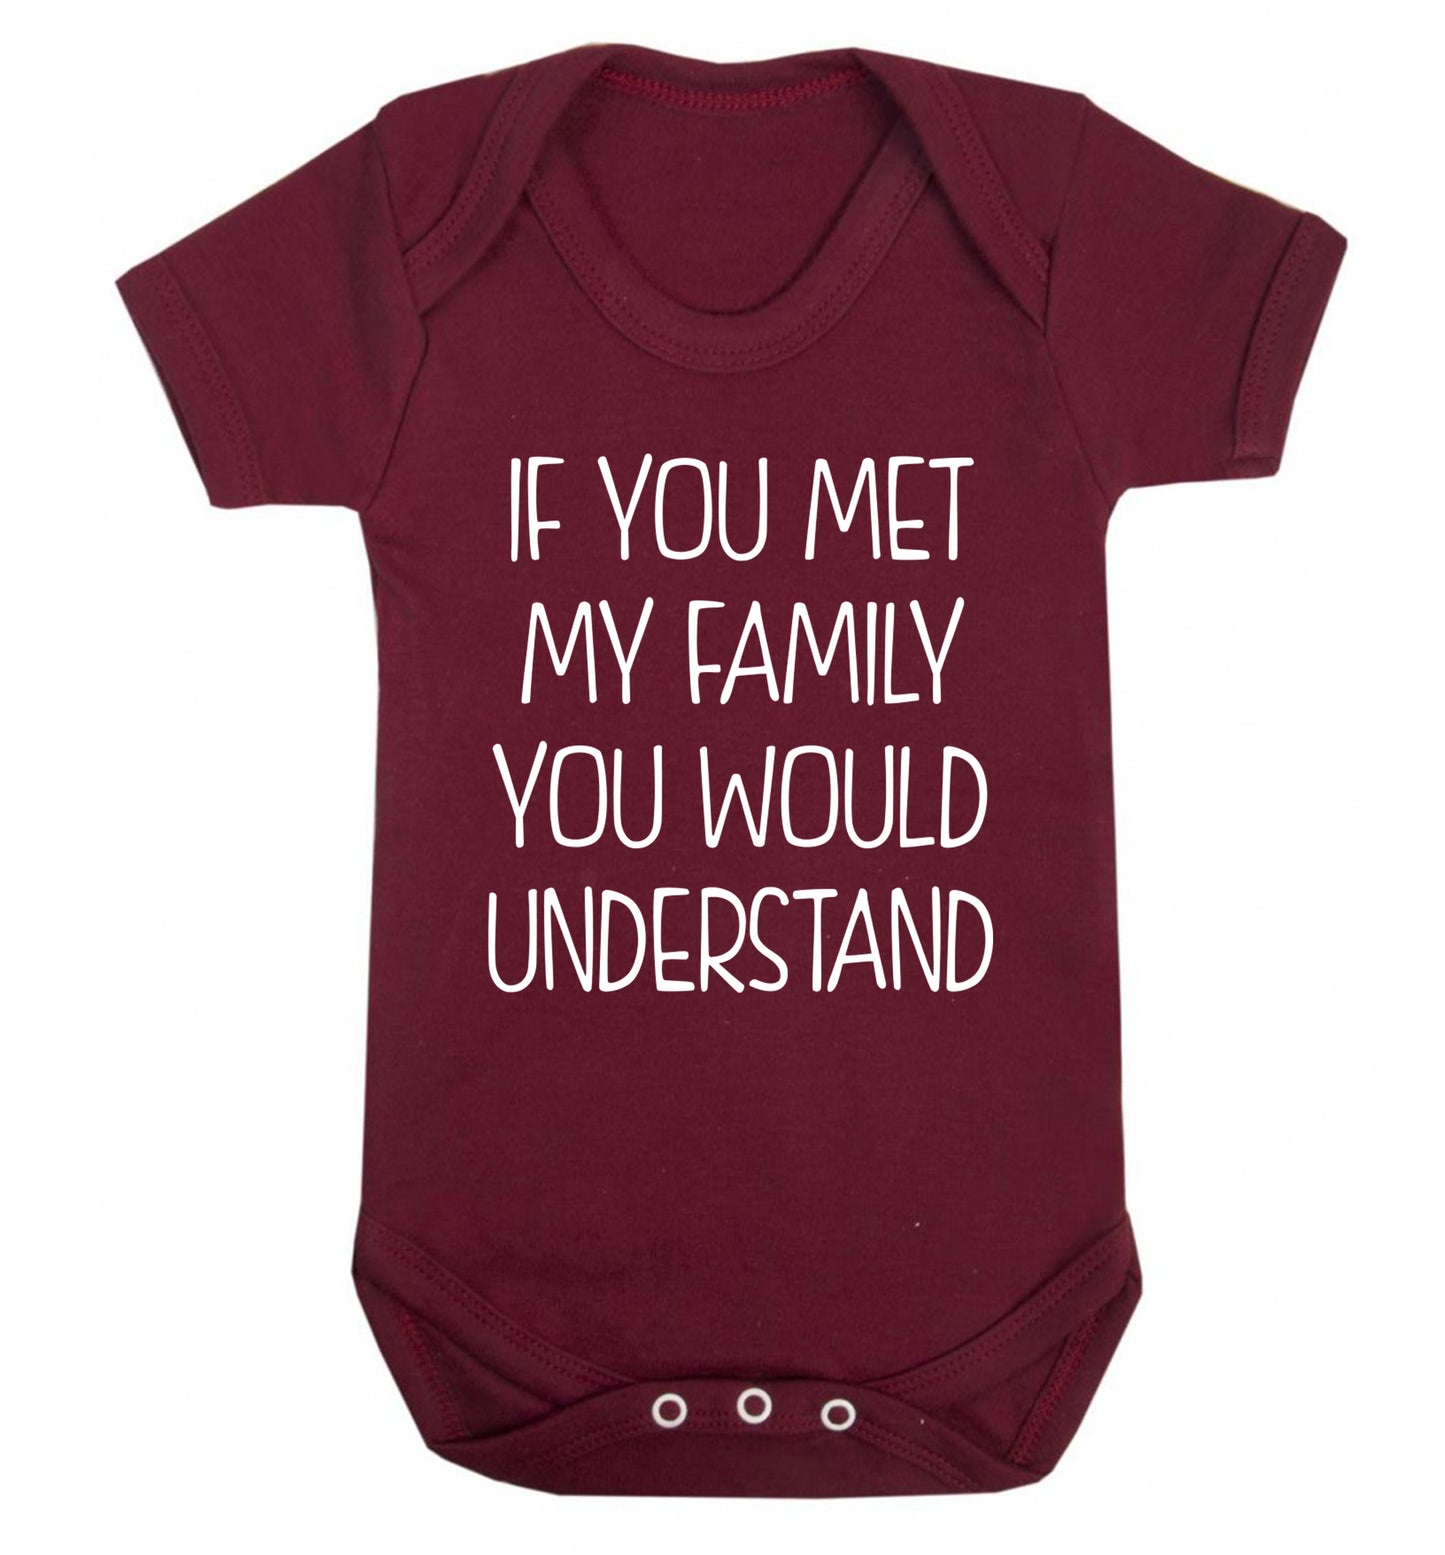 If you met my family you would understand Baby Vest maroon 18-24 months